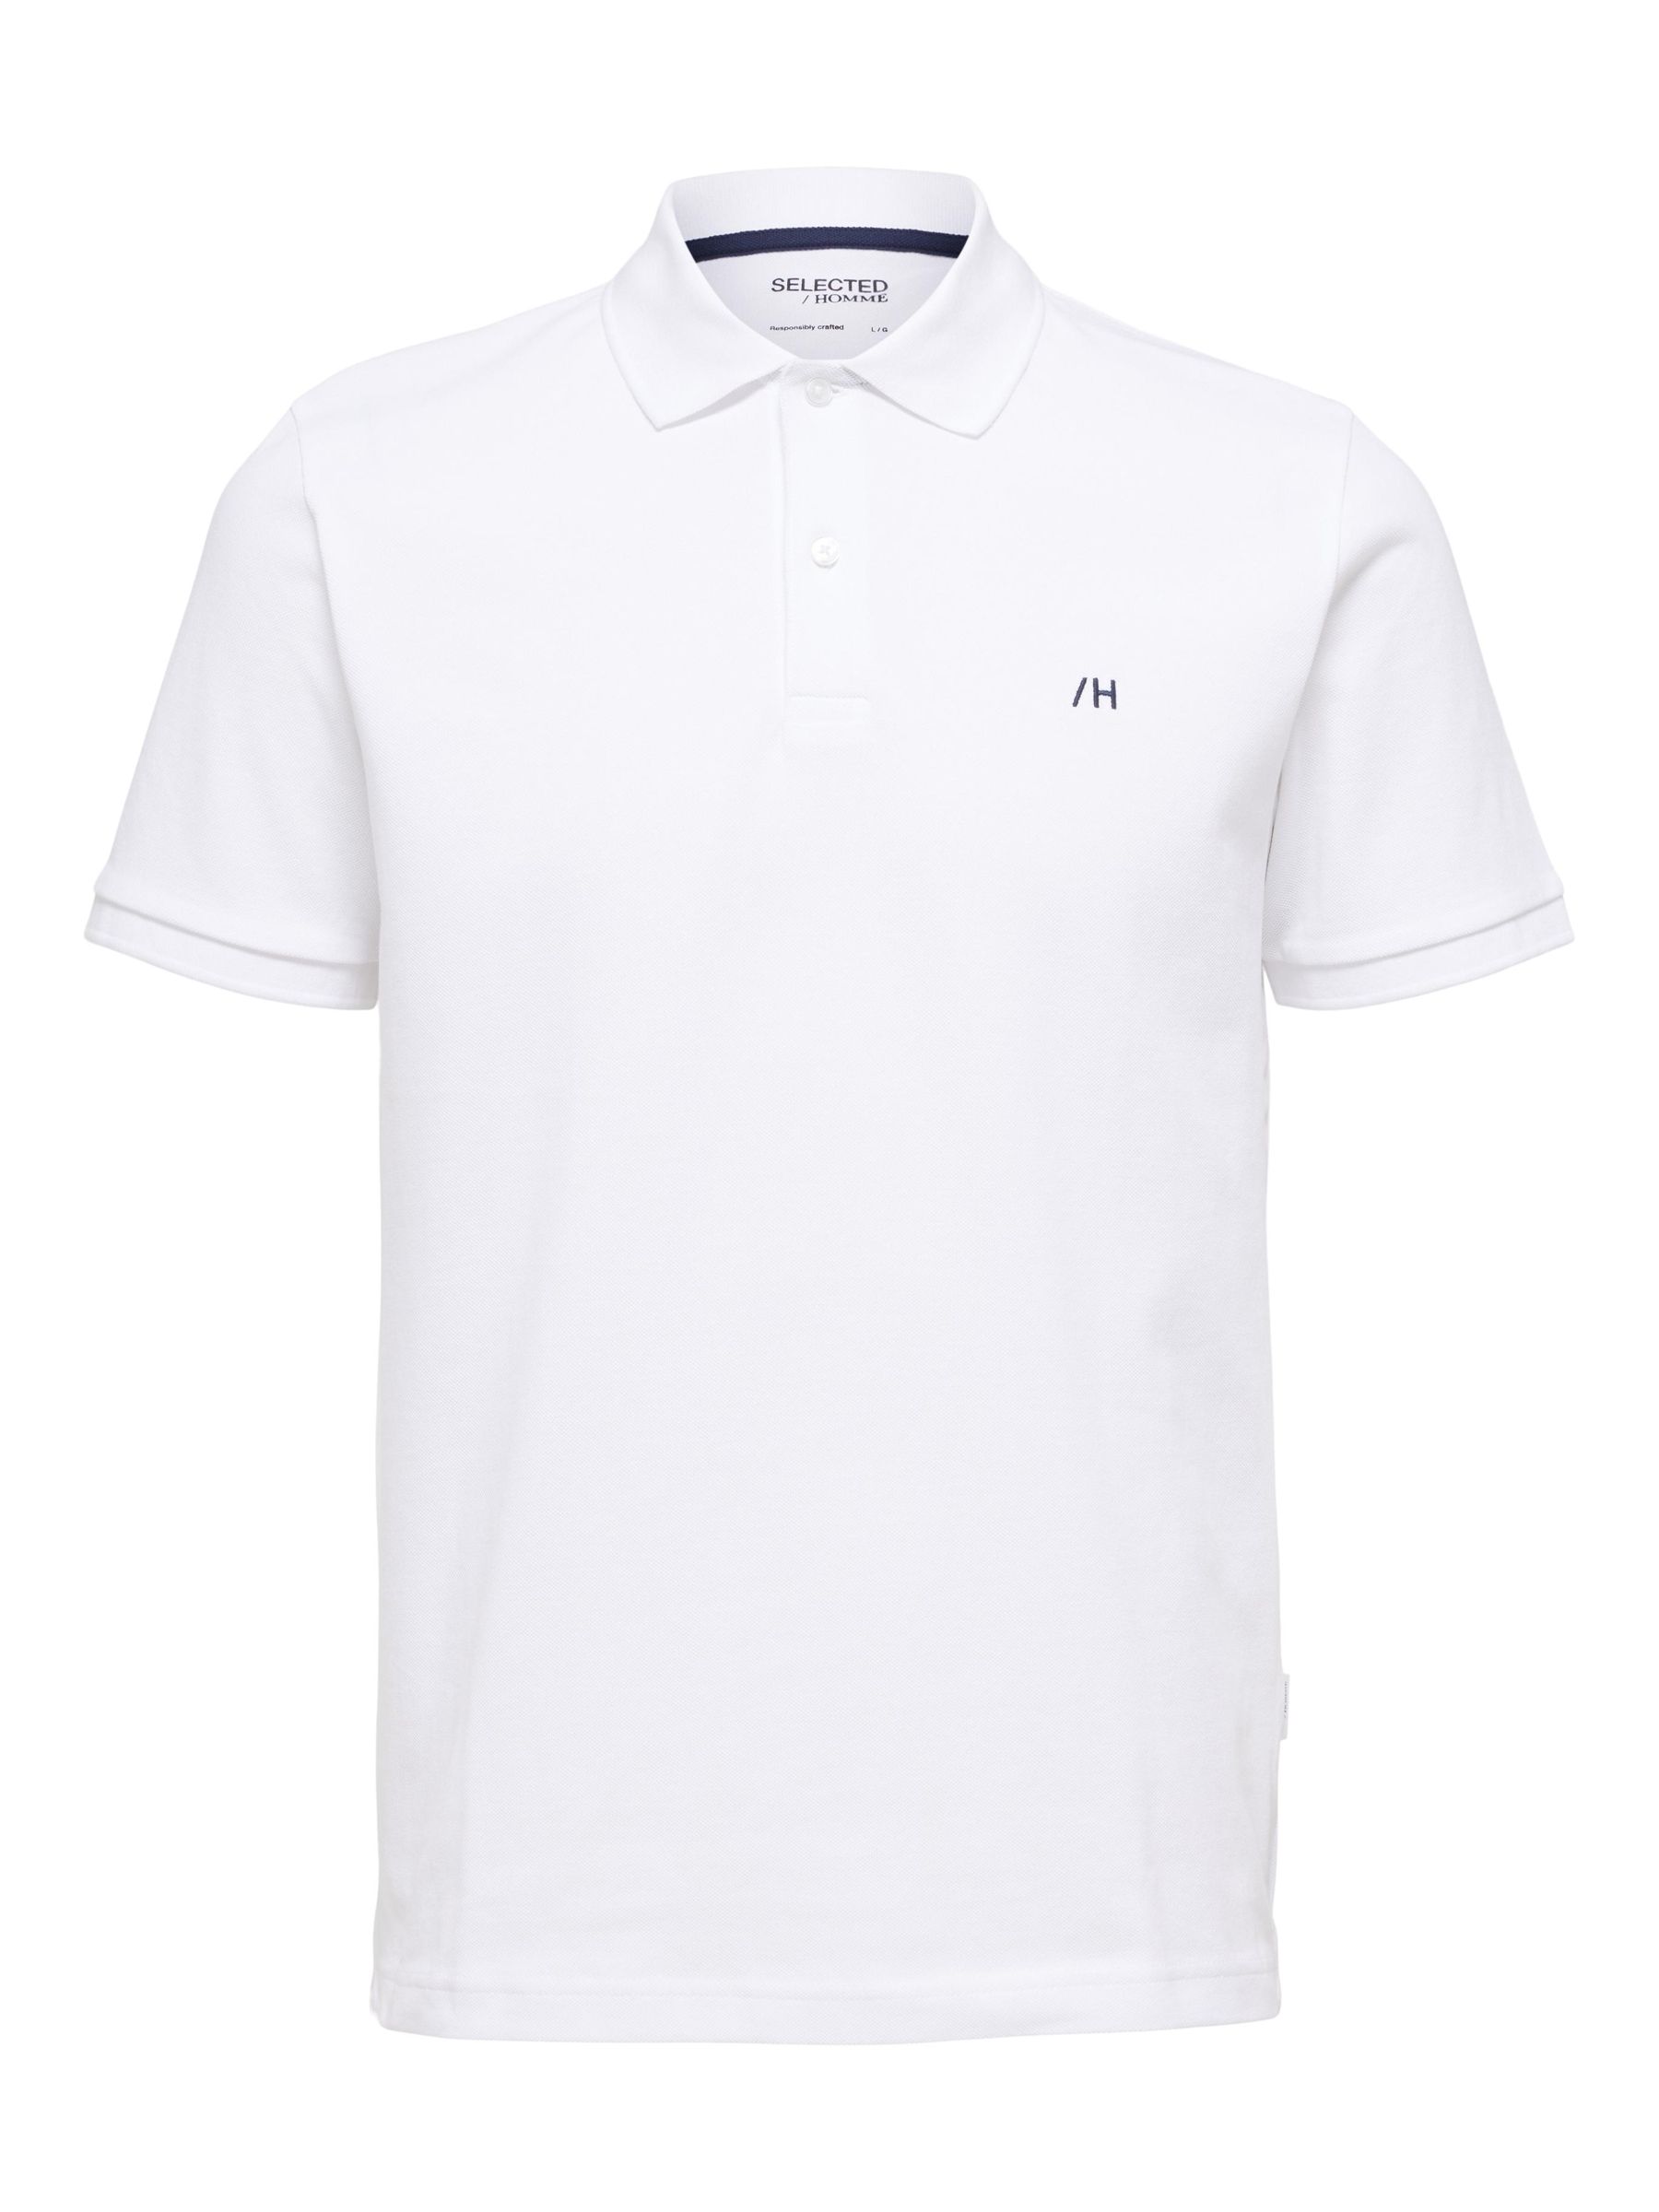 SELECTED | HOMME® SHIRT POLO White CLASSIC |